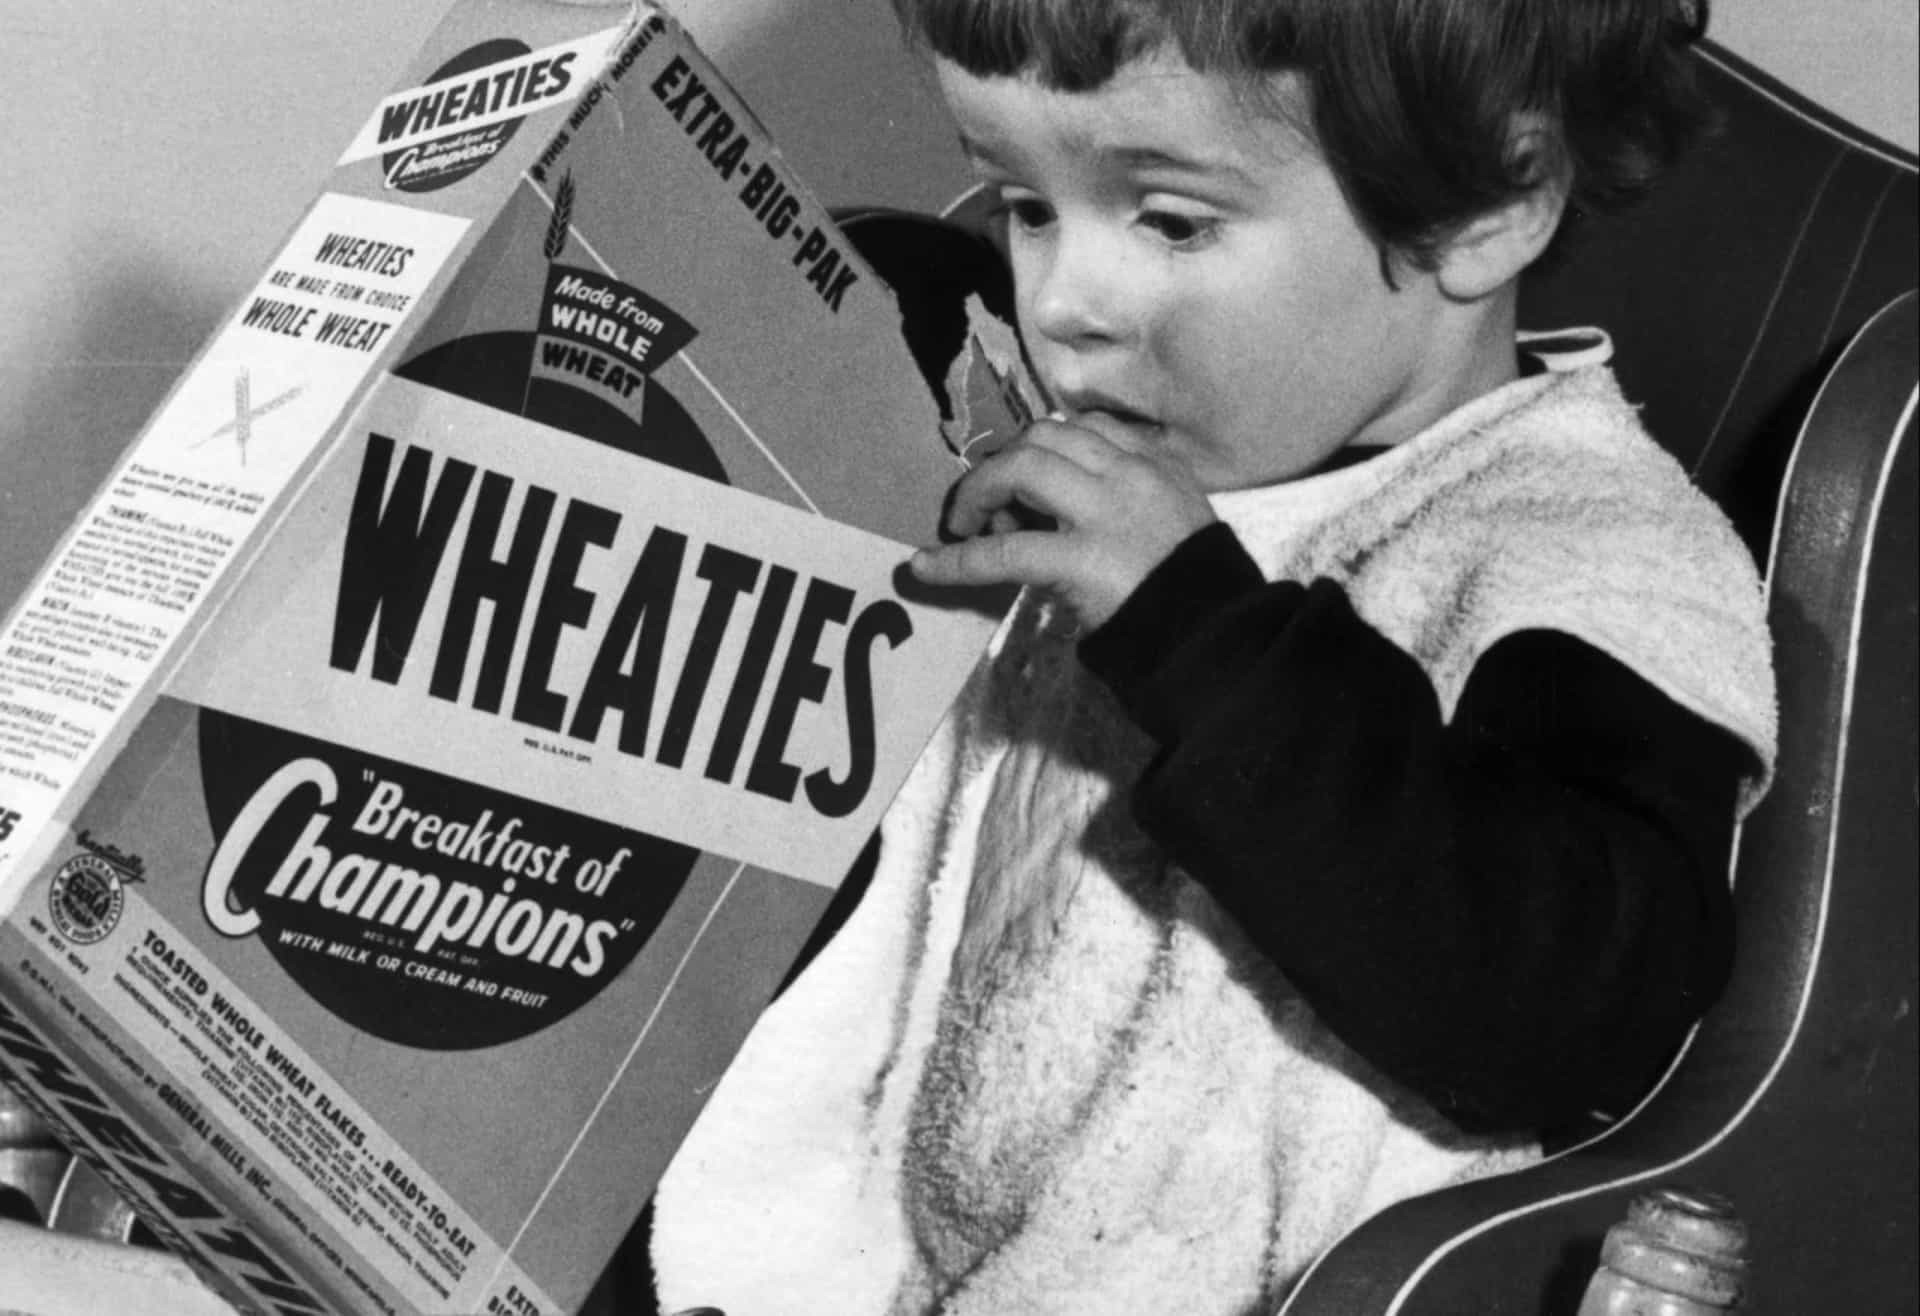 Popular breakfast cereals through the years